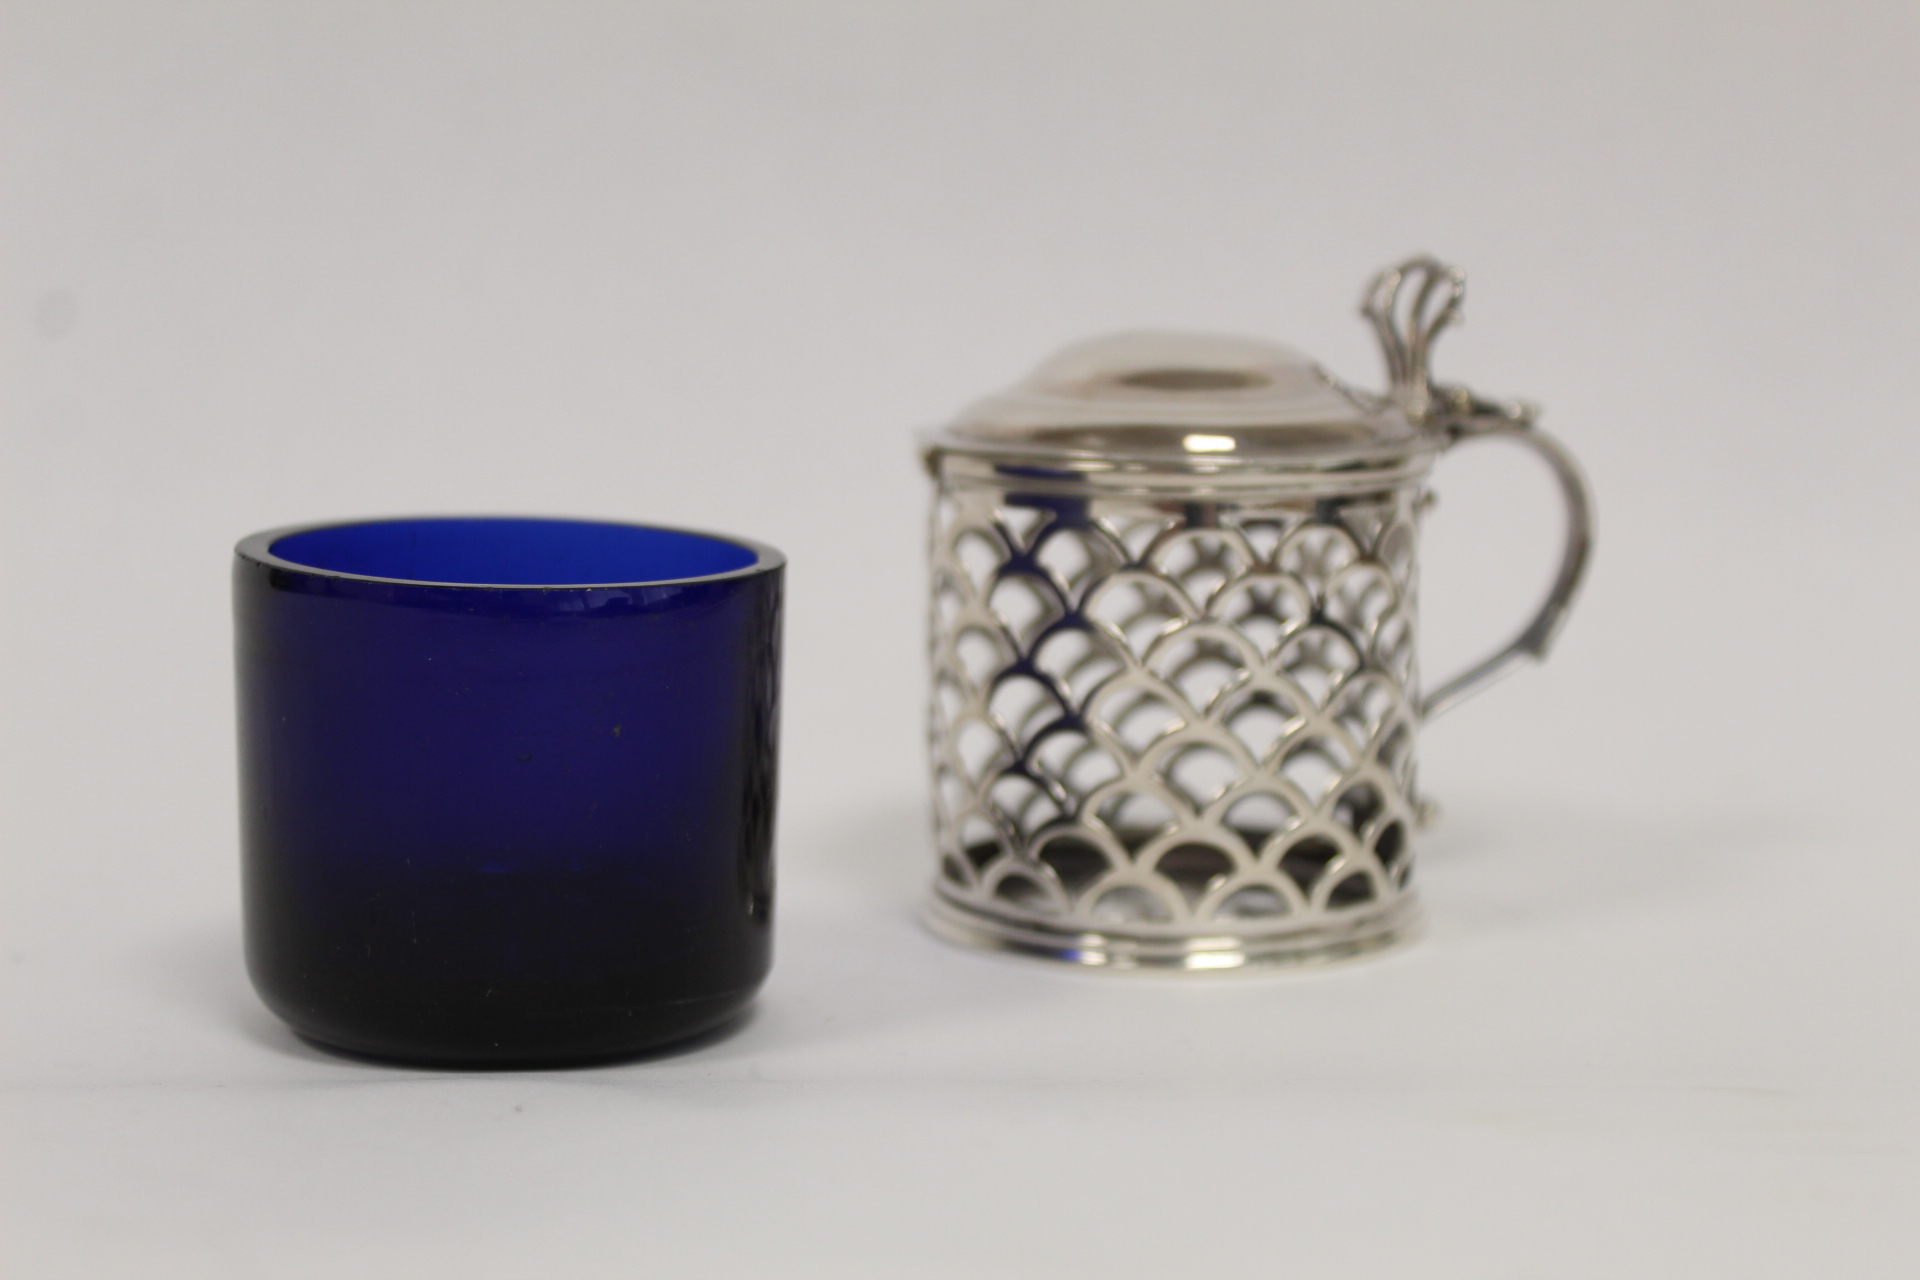 Silver drum mustard pot pierced with scales, with moulded lid, by Michael Plummer 1796, 3 oz. - Image 3 of 4